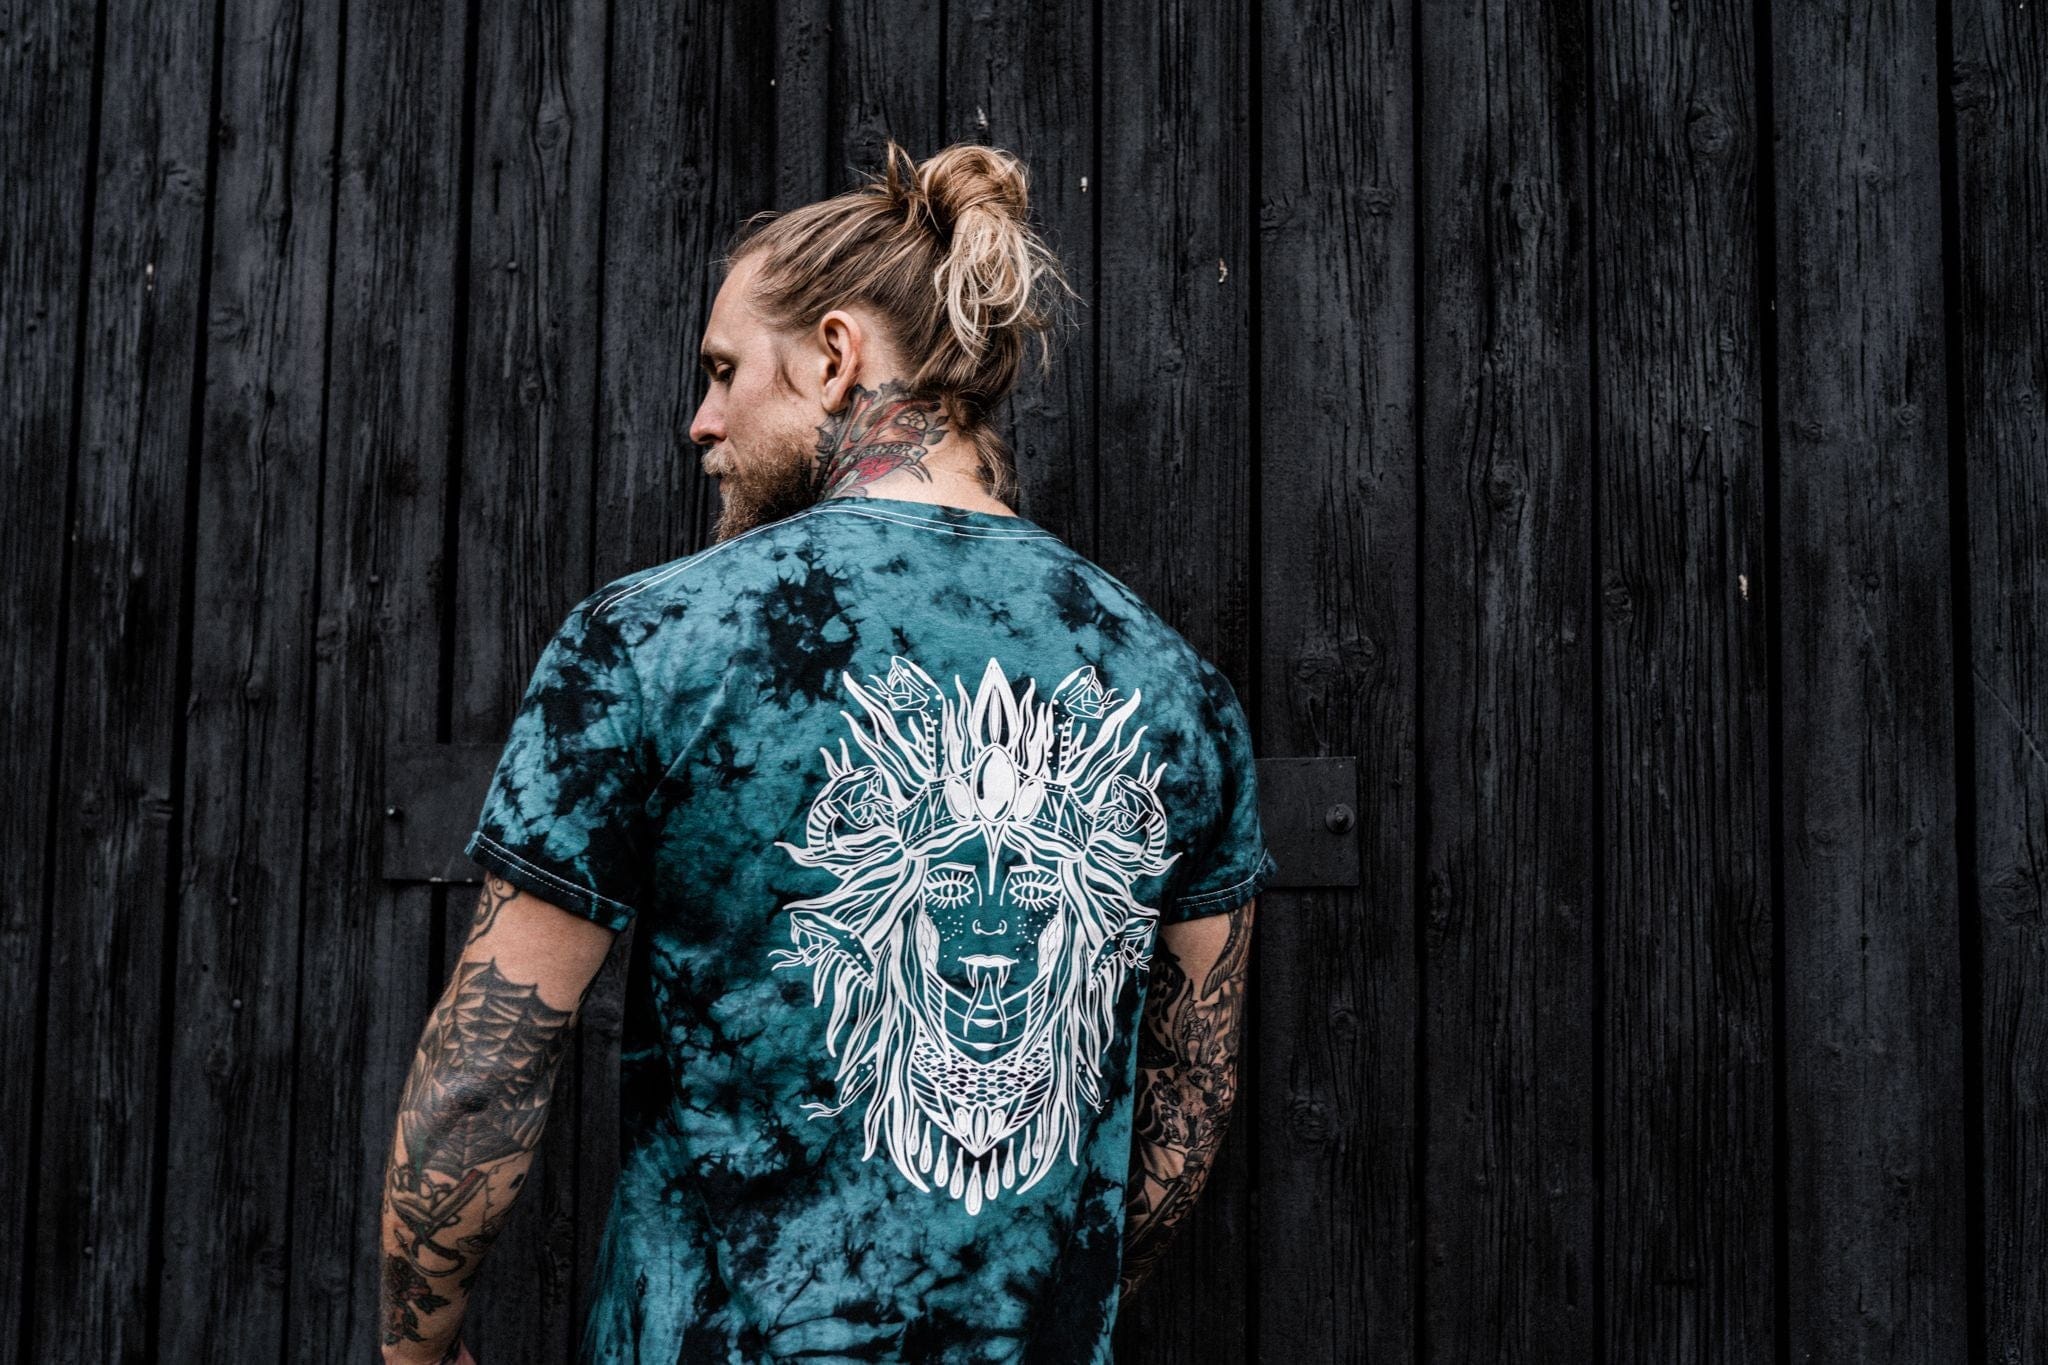 Graphic Tie-Dye T-Shirt Pack